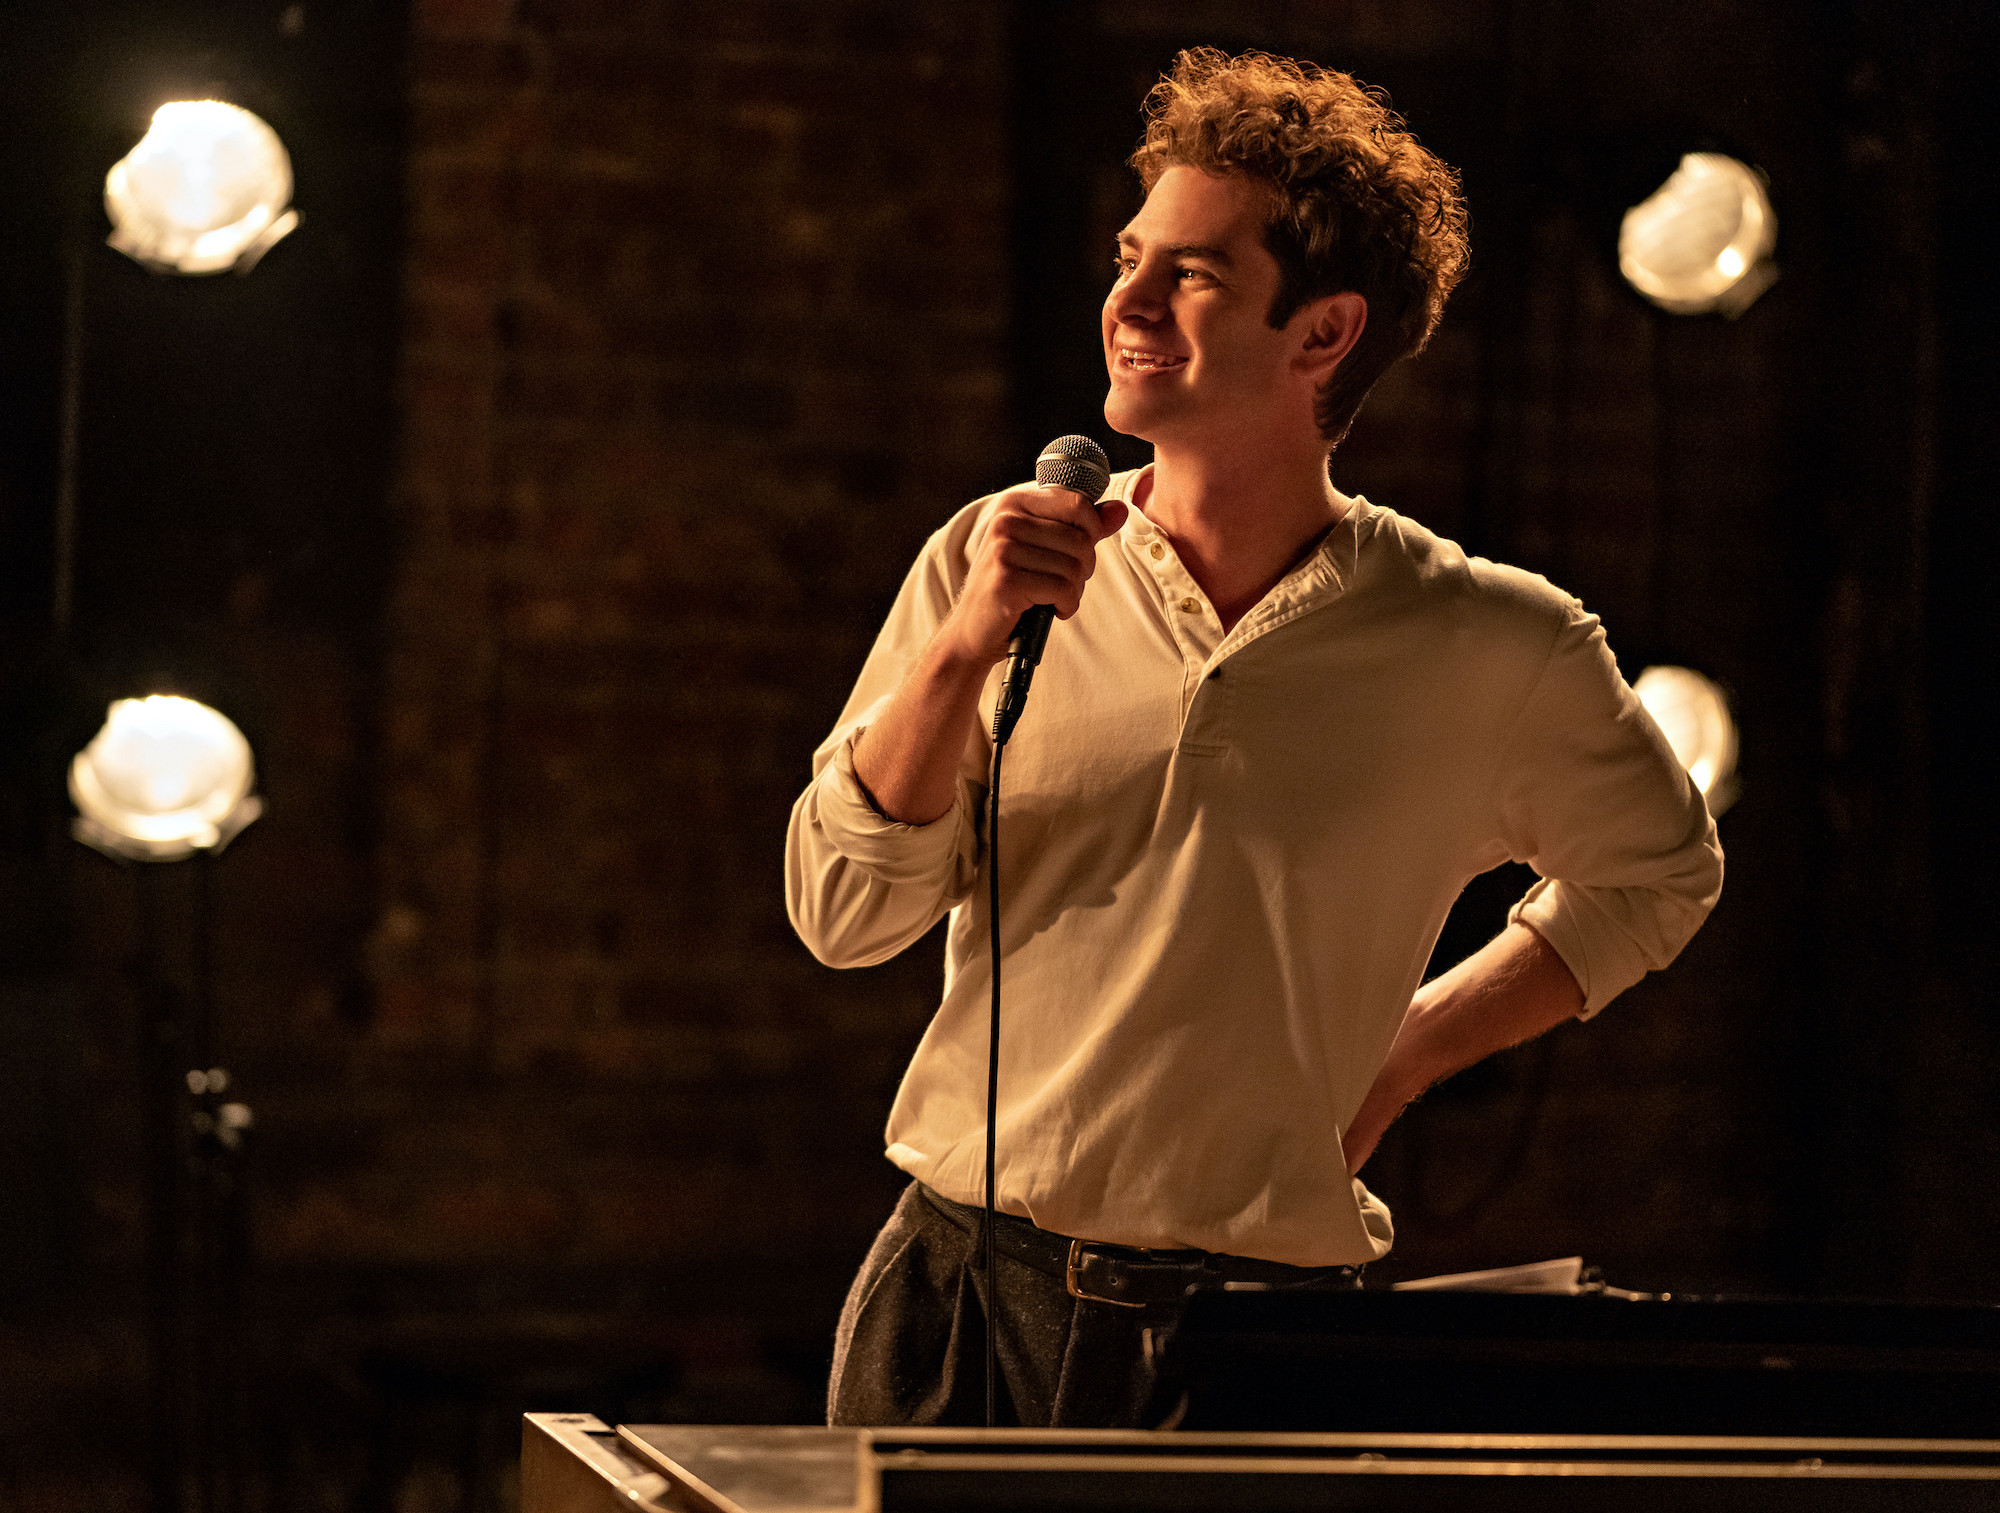 Andrew Garfield as Jonathan Larson in 'TICK, TICK…BOOM!' He stands on a stage with brick walls behind him and warm amber stage lights on the sides. He wears a white long-sleeved shirt with three buttons and dark pants and holds a microphone up to his face as he smiles.